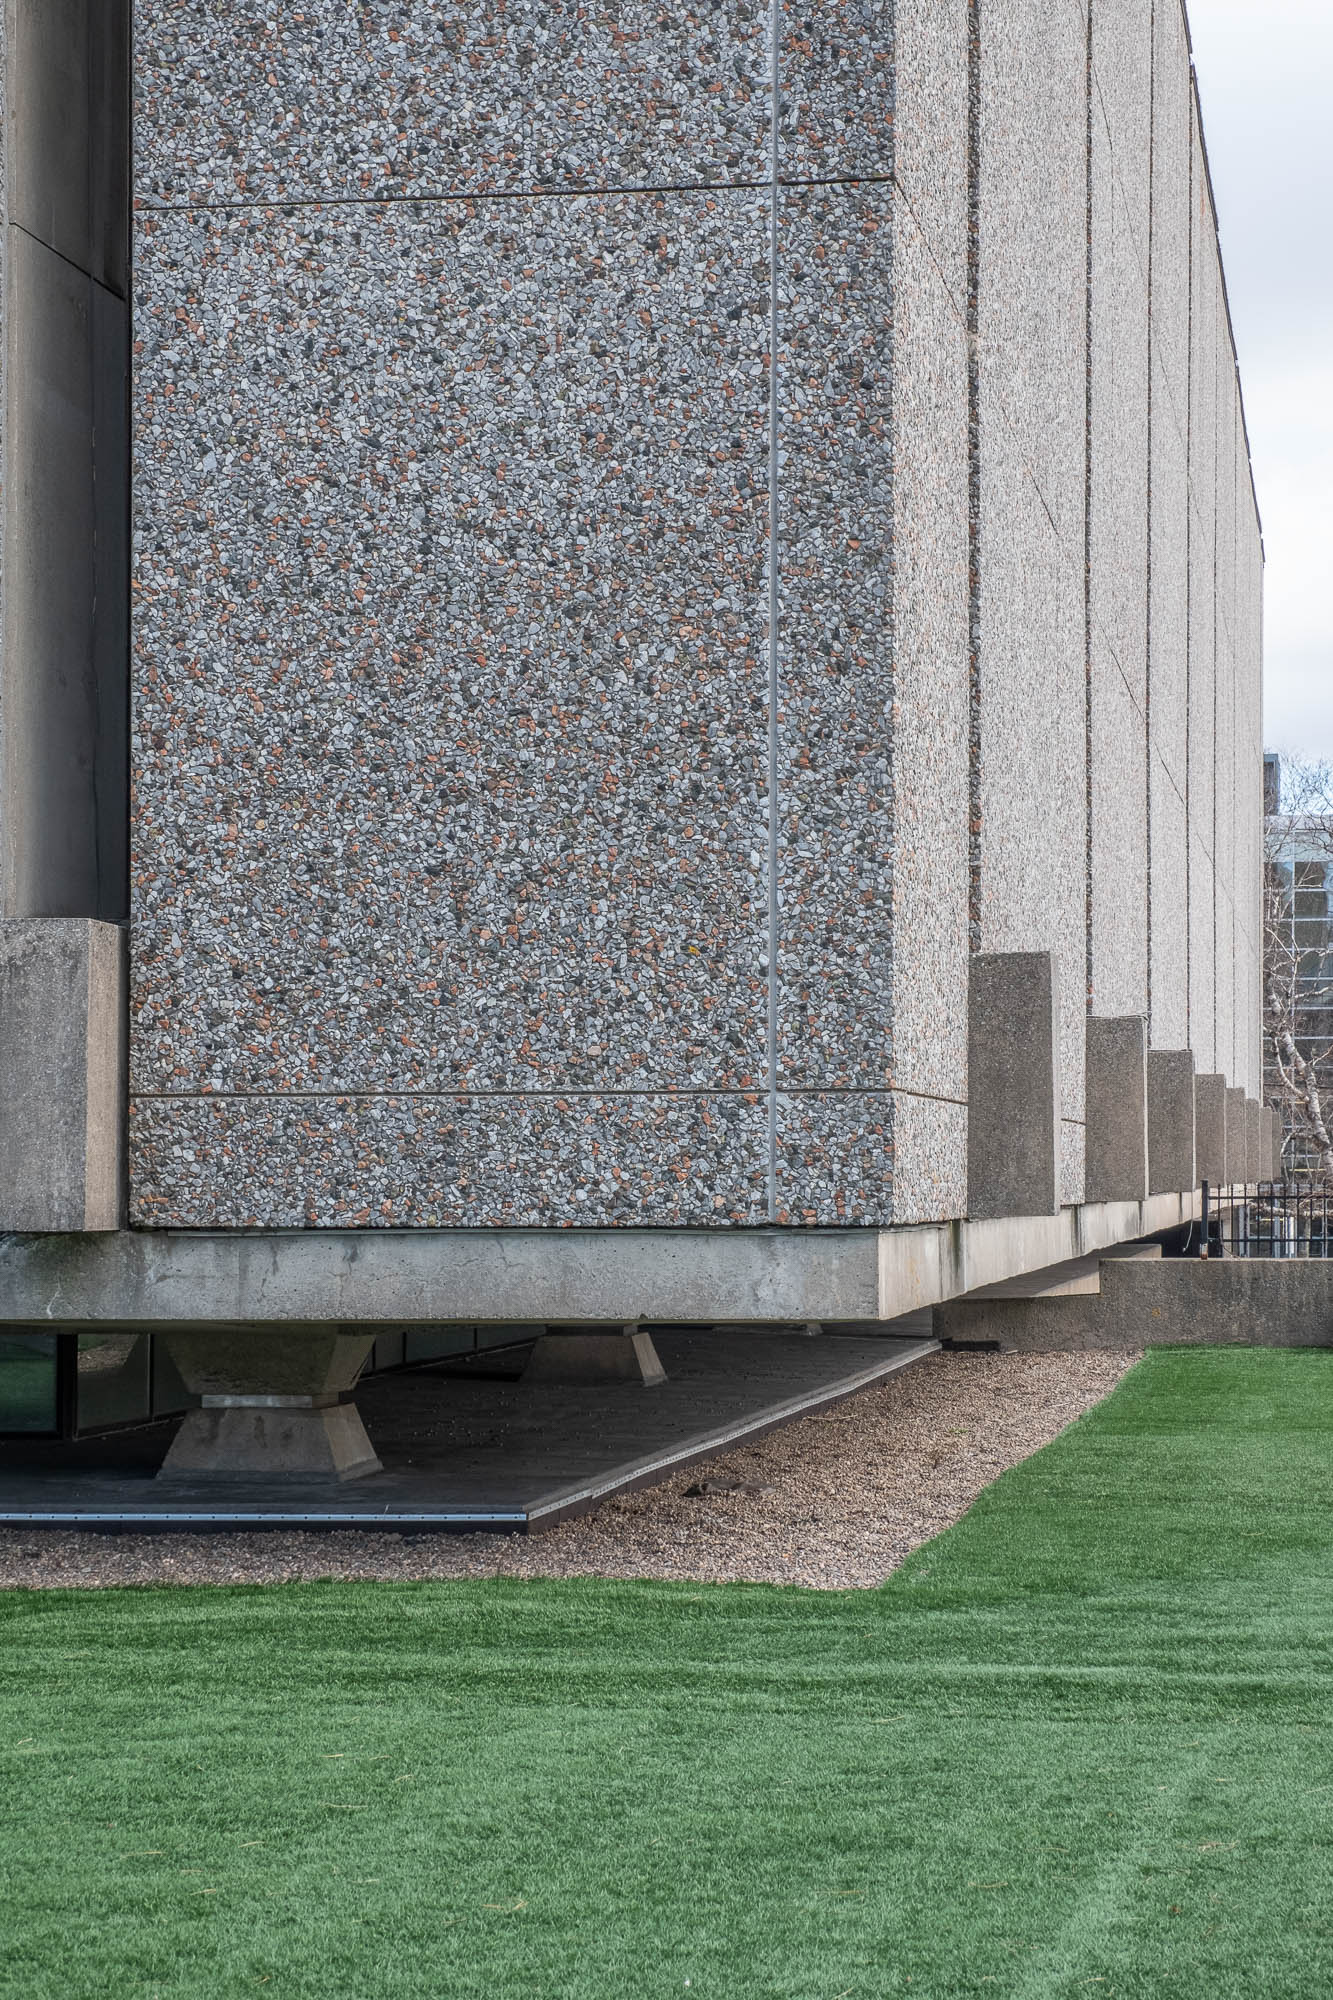 Exterior of a Brutalist building, close-up view of a corner of the building. We see details of textured concrete panels. The building is raised a few feet above ground, which is covered in artificial grass.